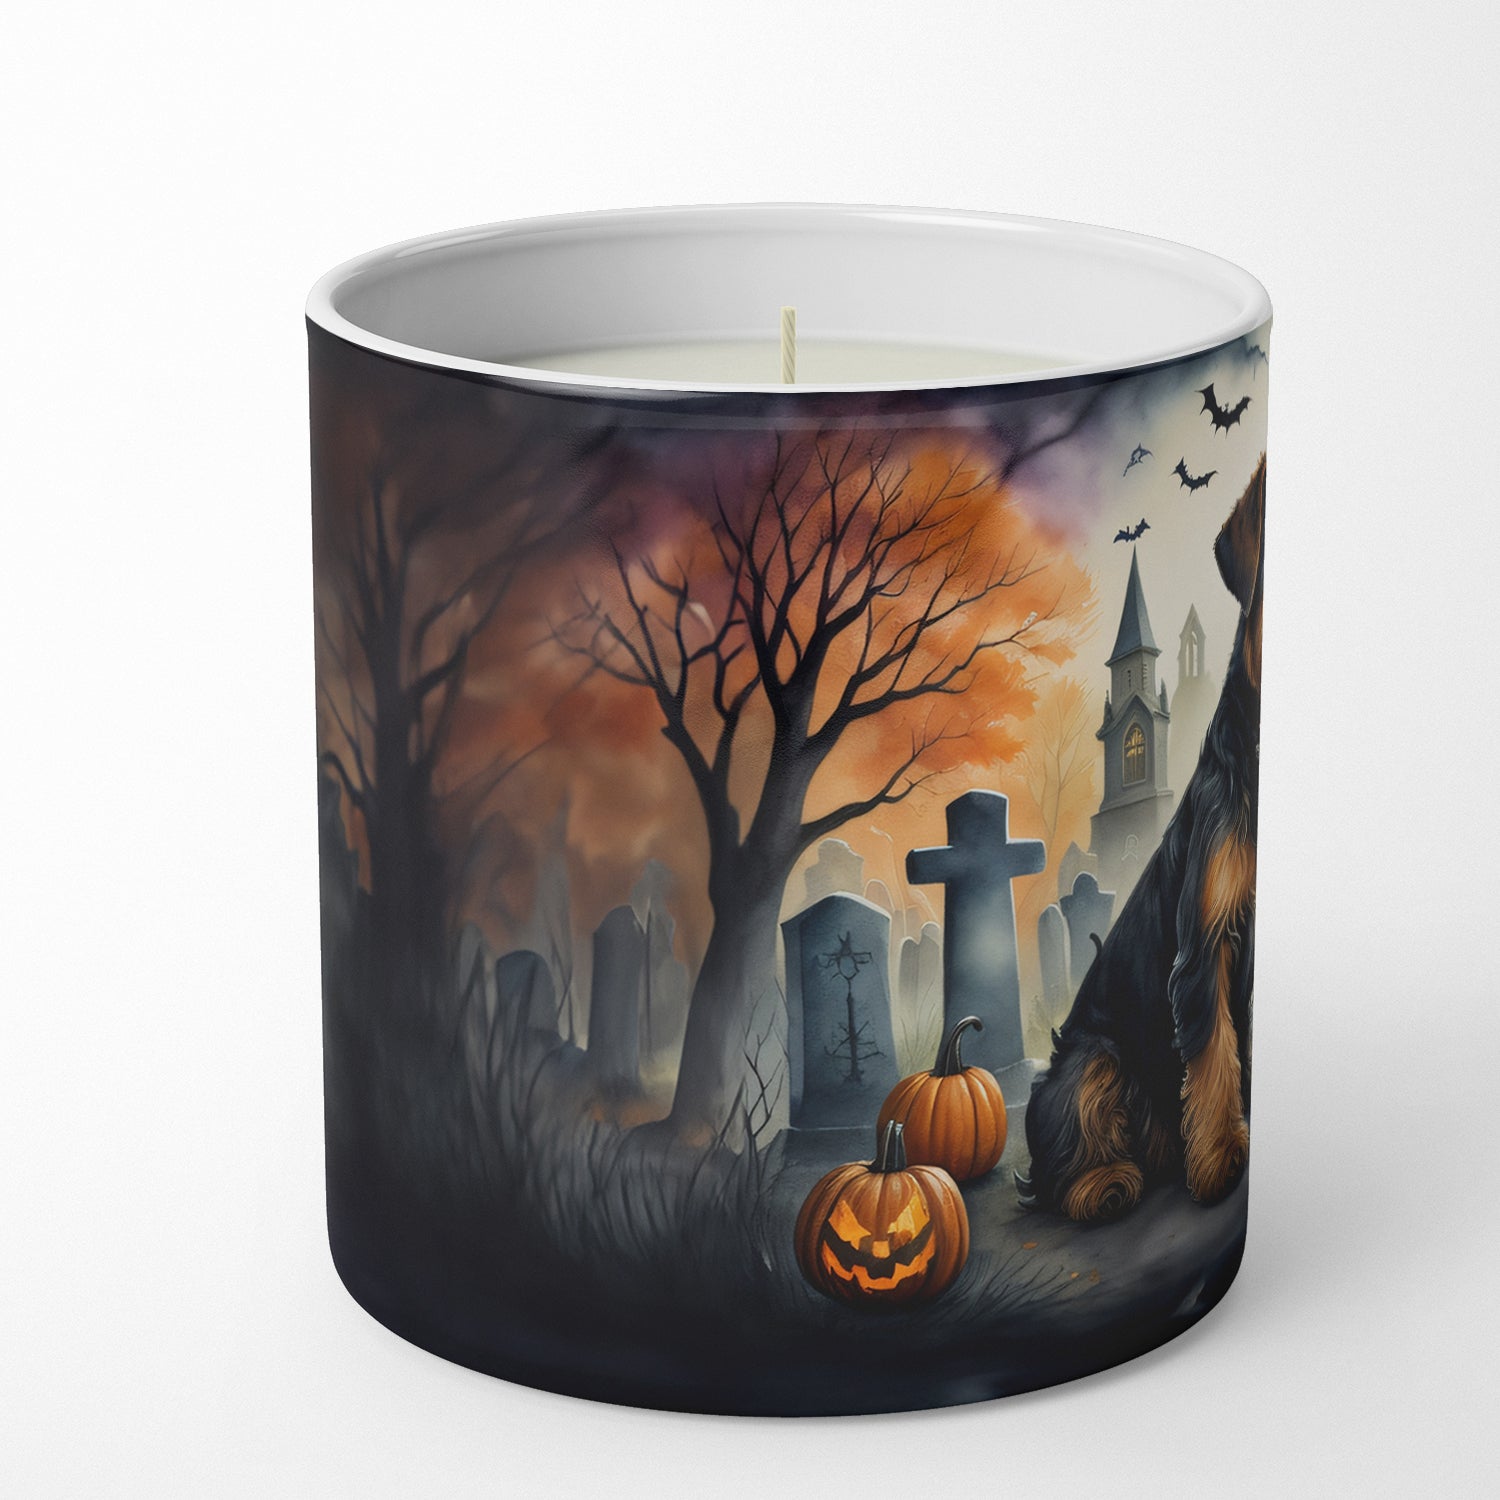 Airedale Terrier Spooky Halloween Decorative Soy Candle